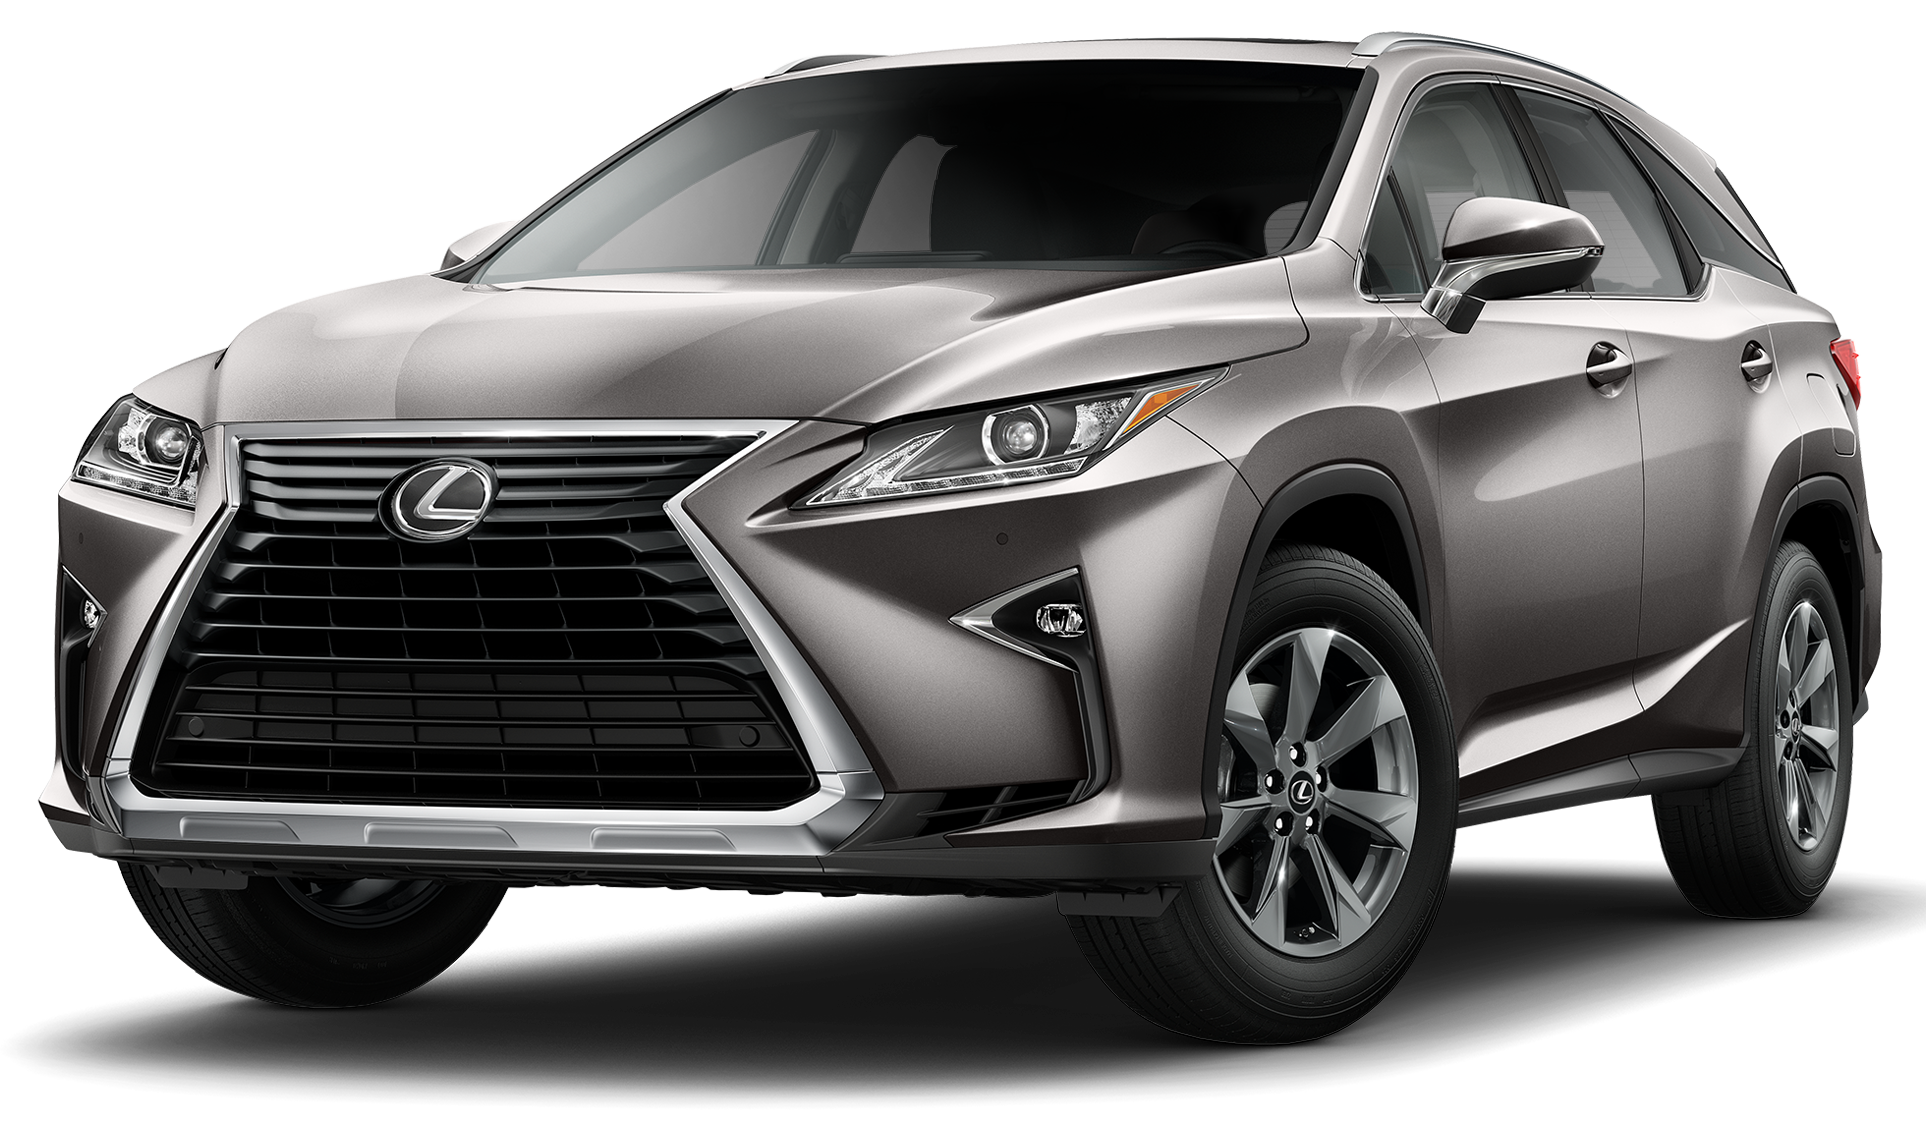 2018 Lexus RX 450hL Incentives, Specials & Offers in Wilkes-Barre PA